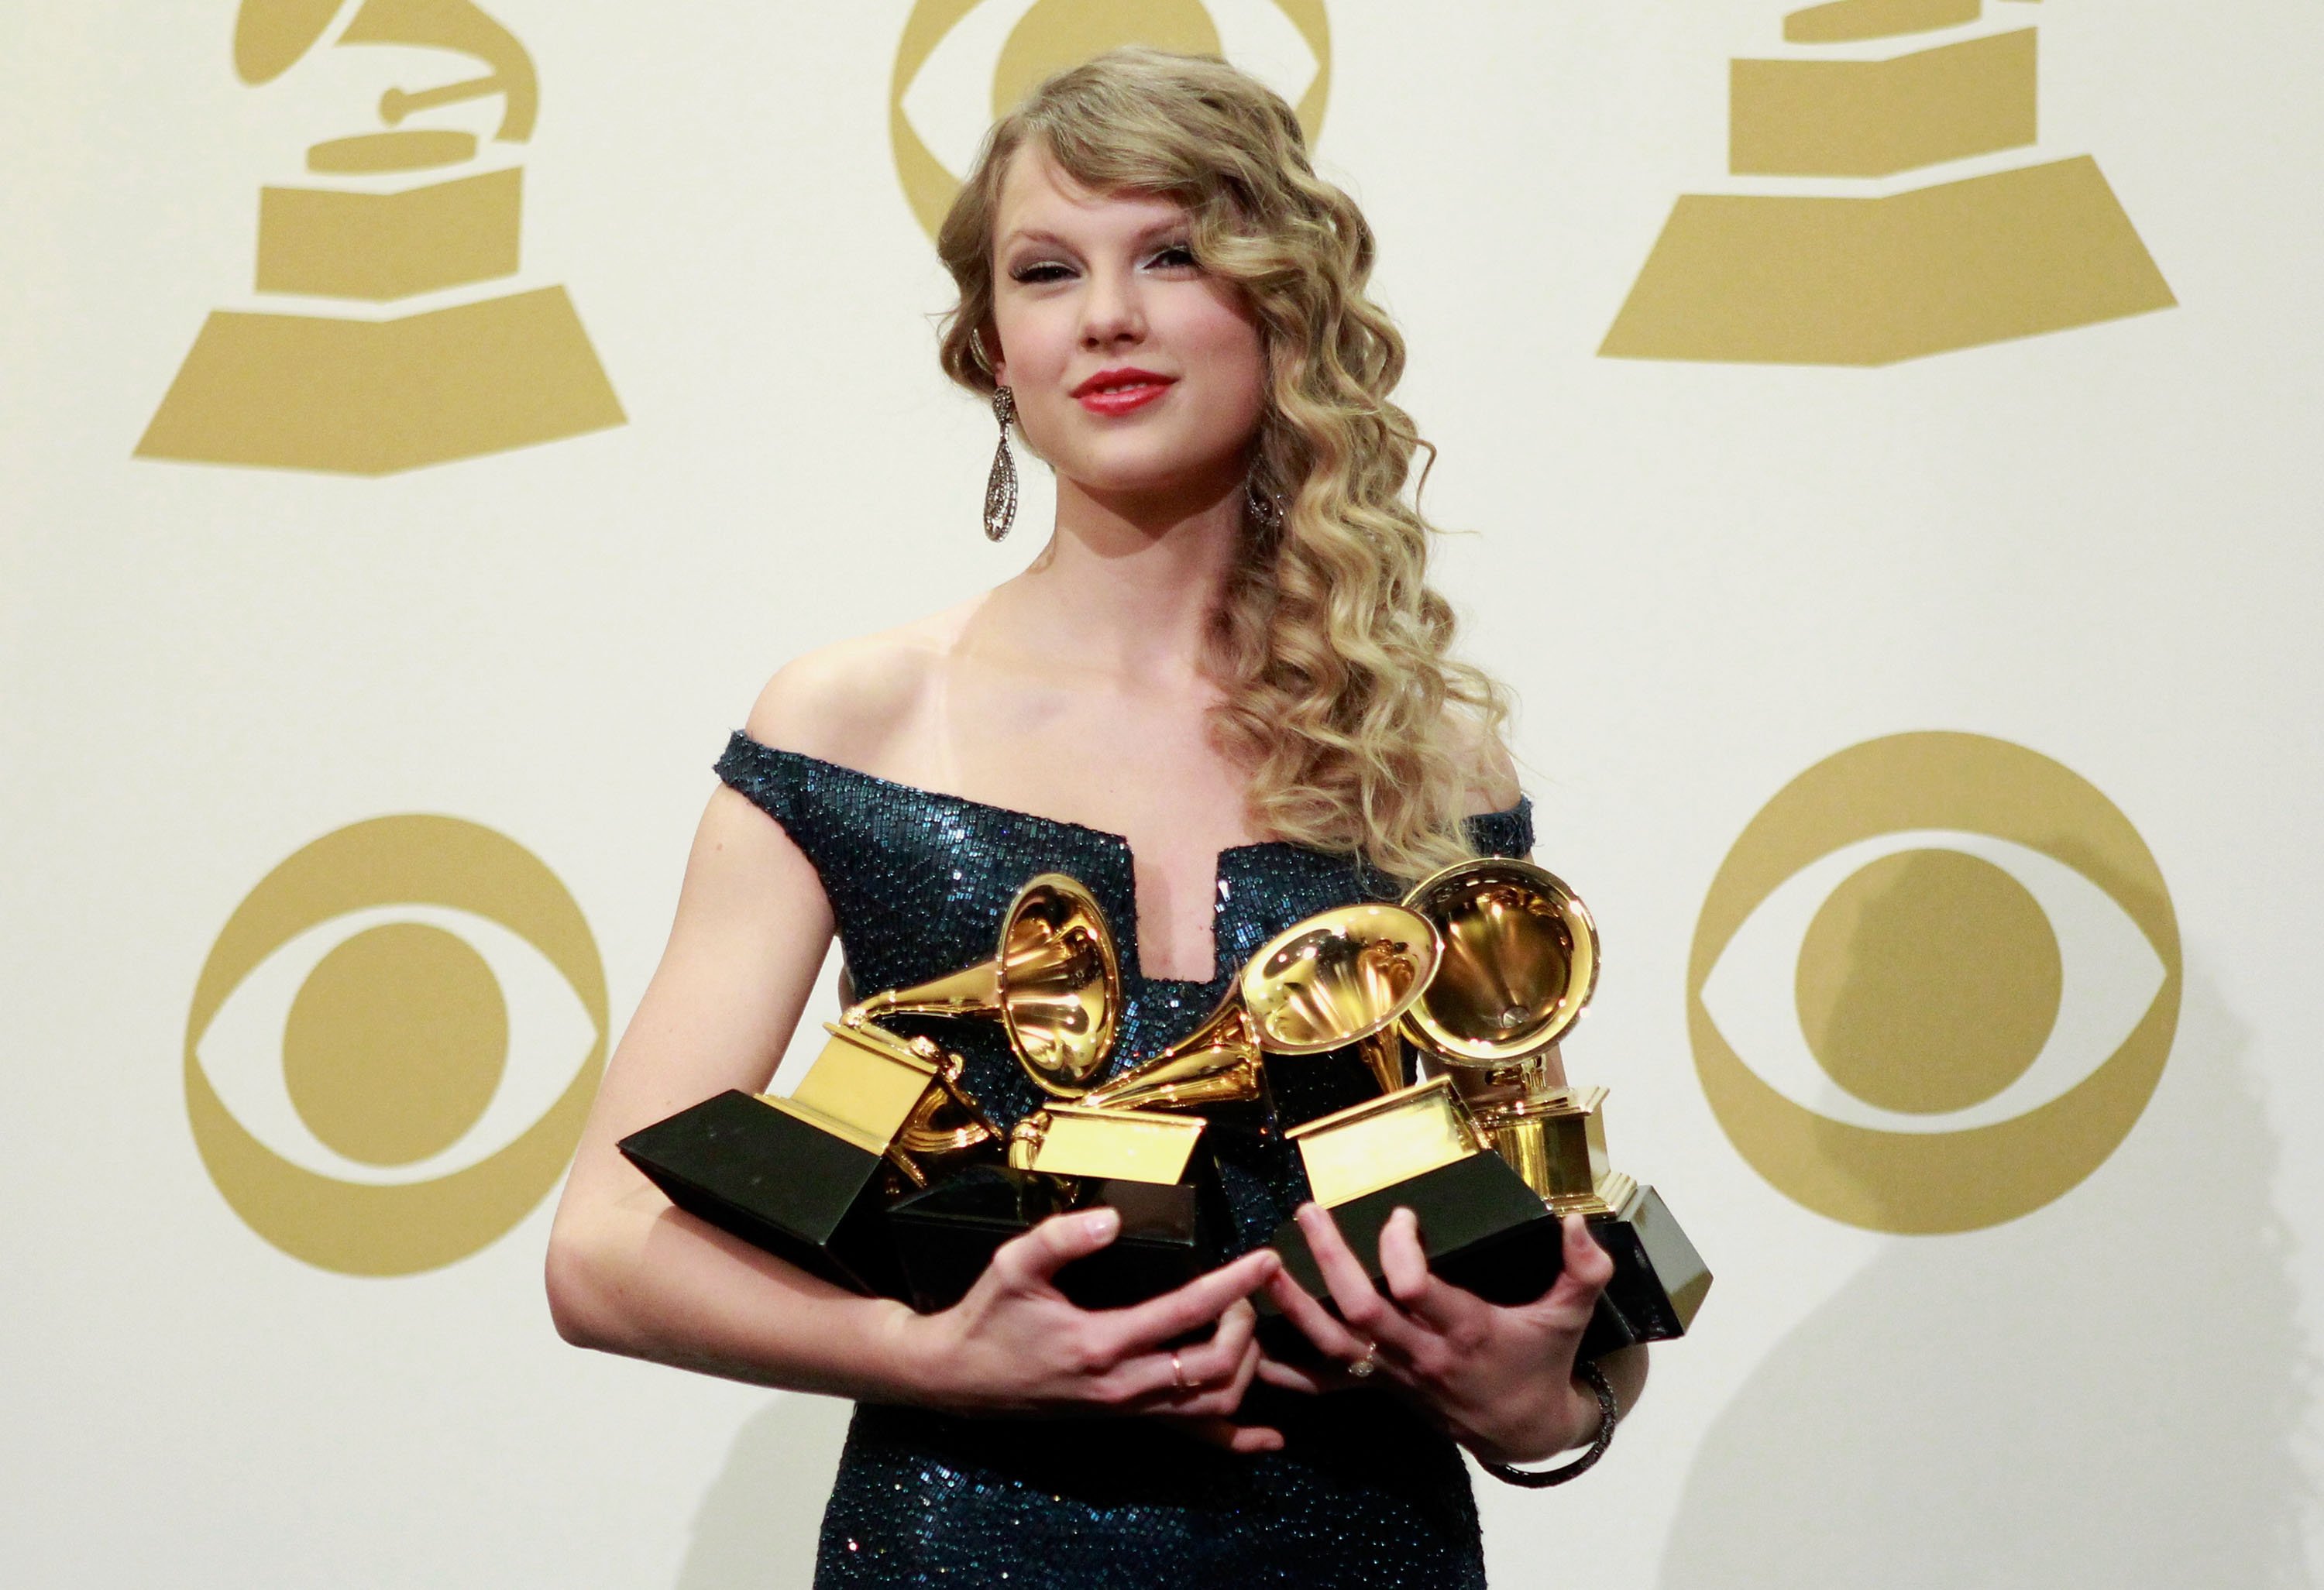 Taylor Swift poses with her Grammys at the 2010 Grammy Awards